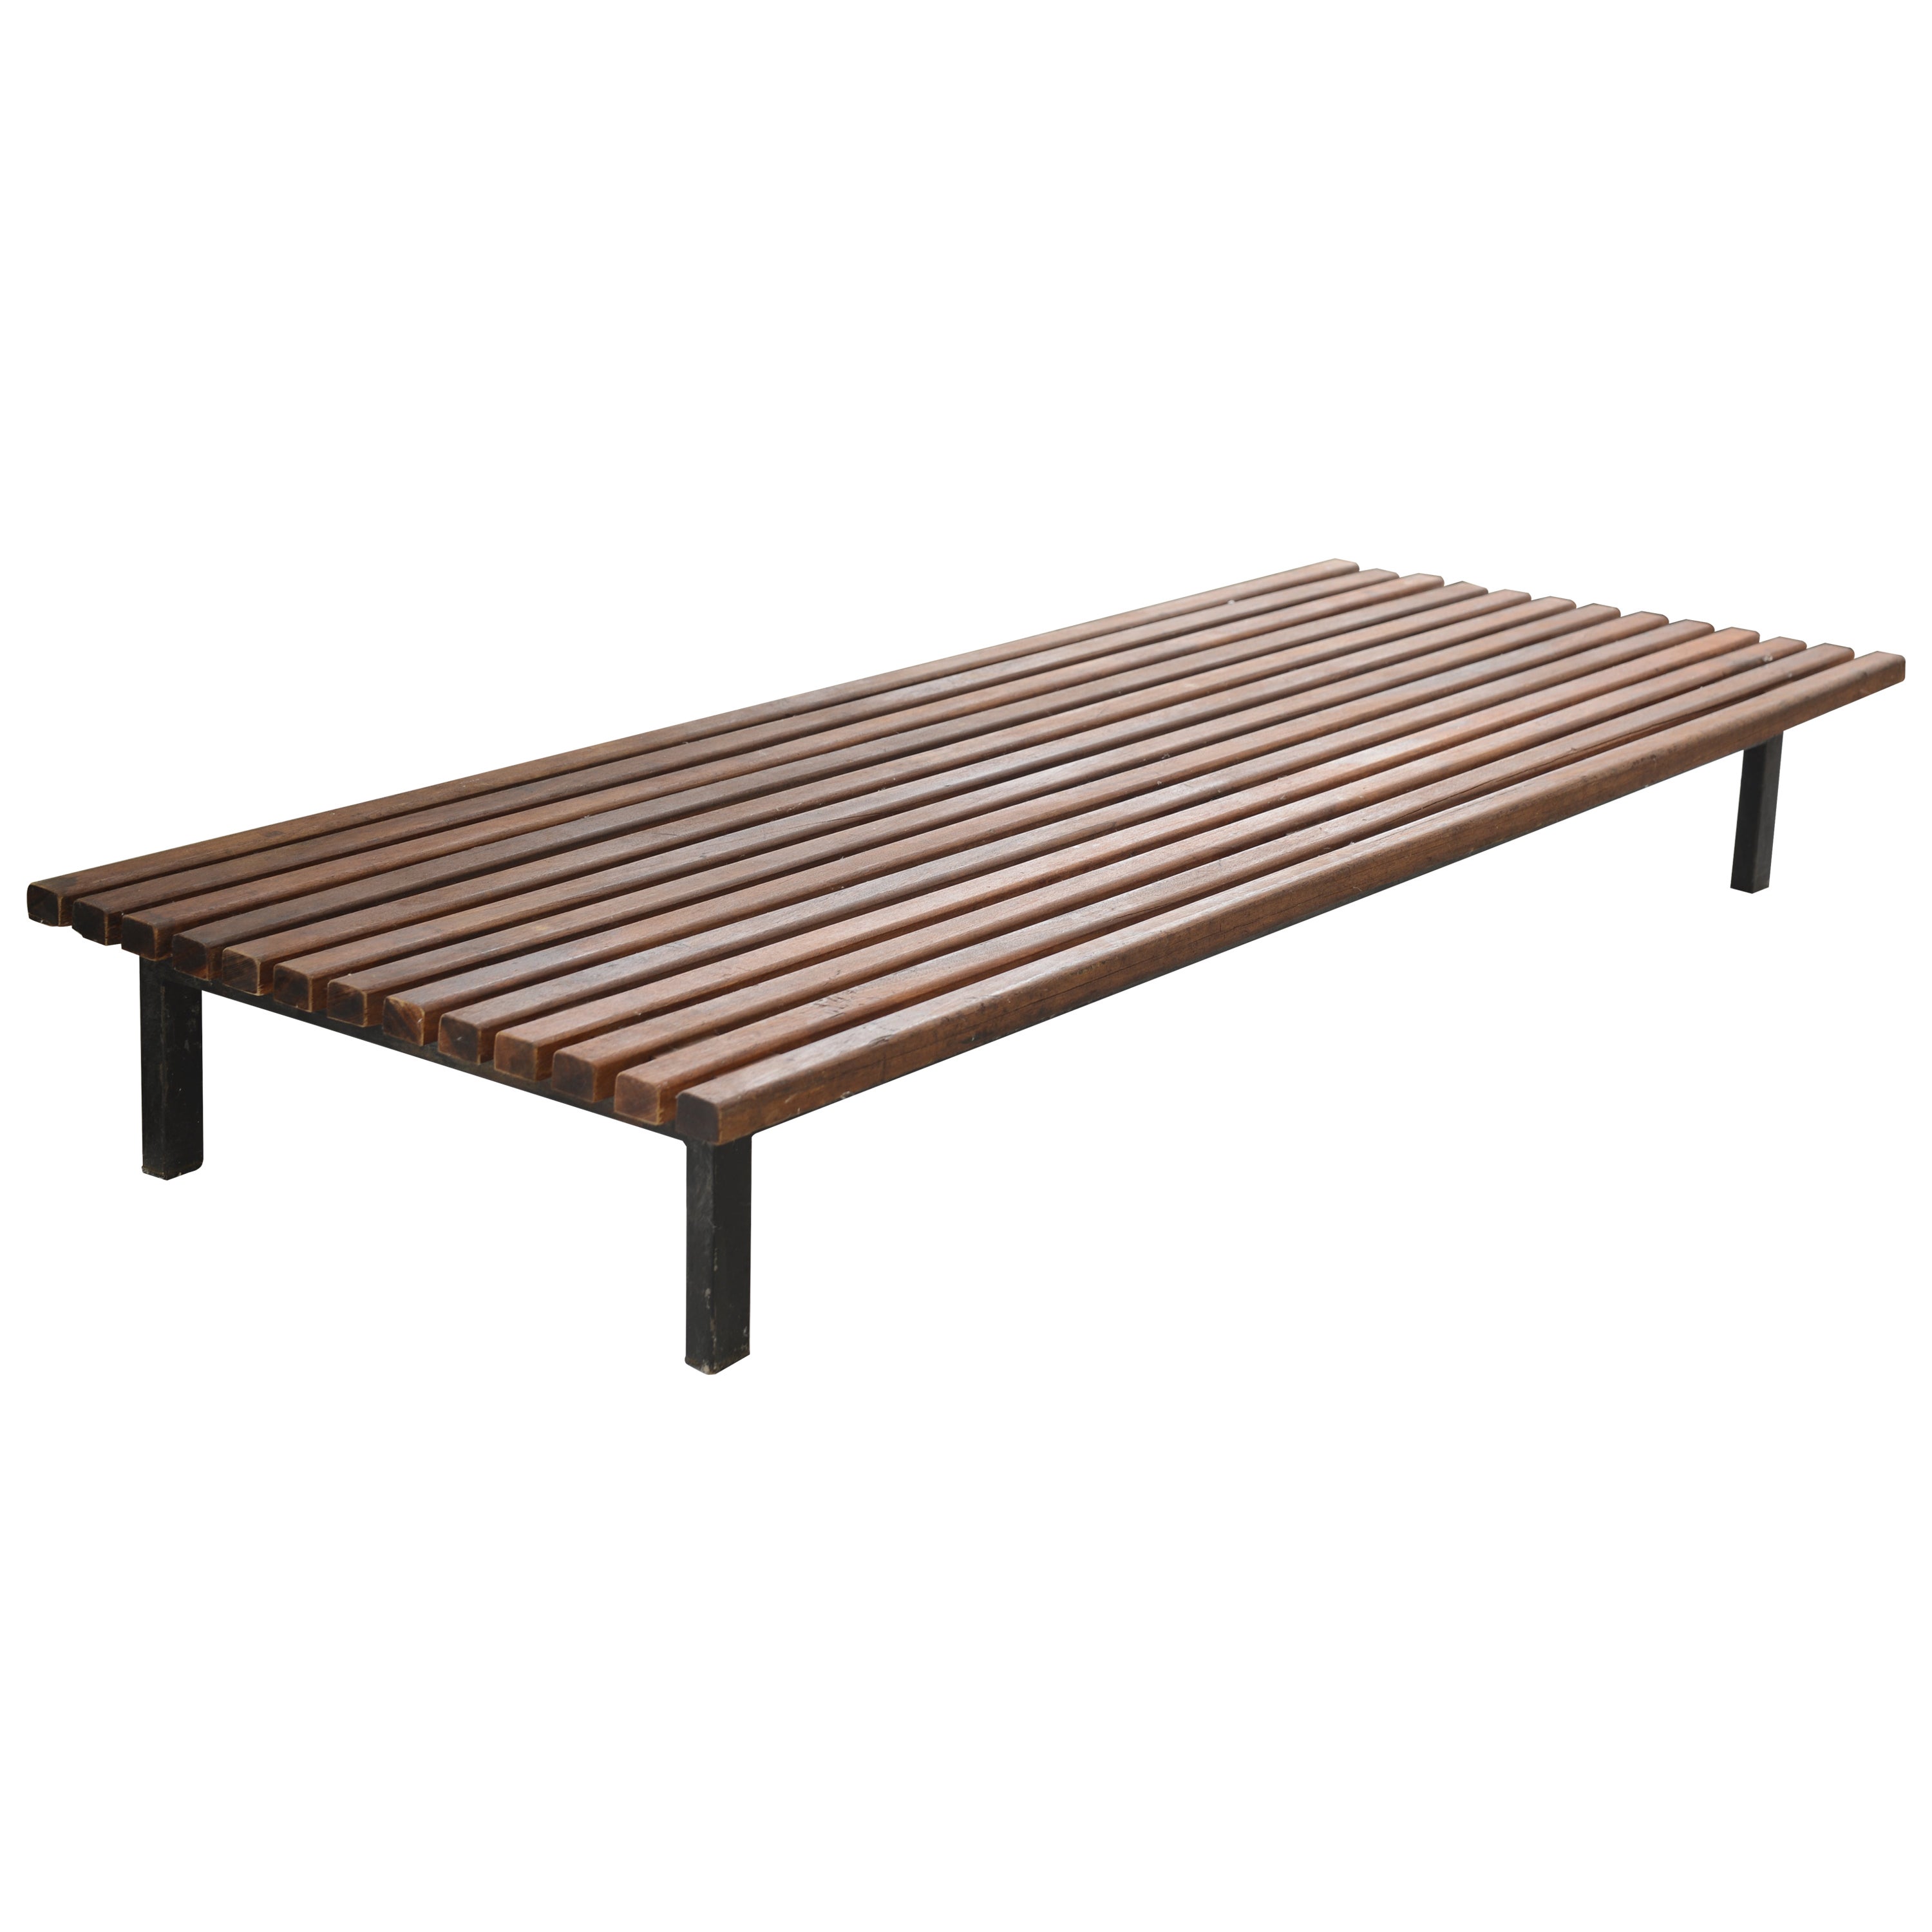 Charlotte Perriand Cansado Bench / Authentic Mid-Century Modern Paris, 1958 For Sale